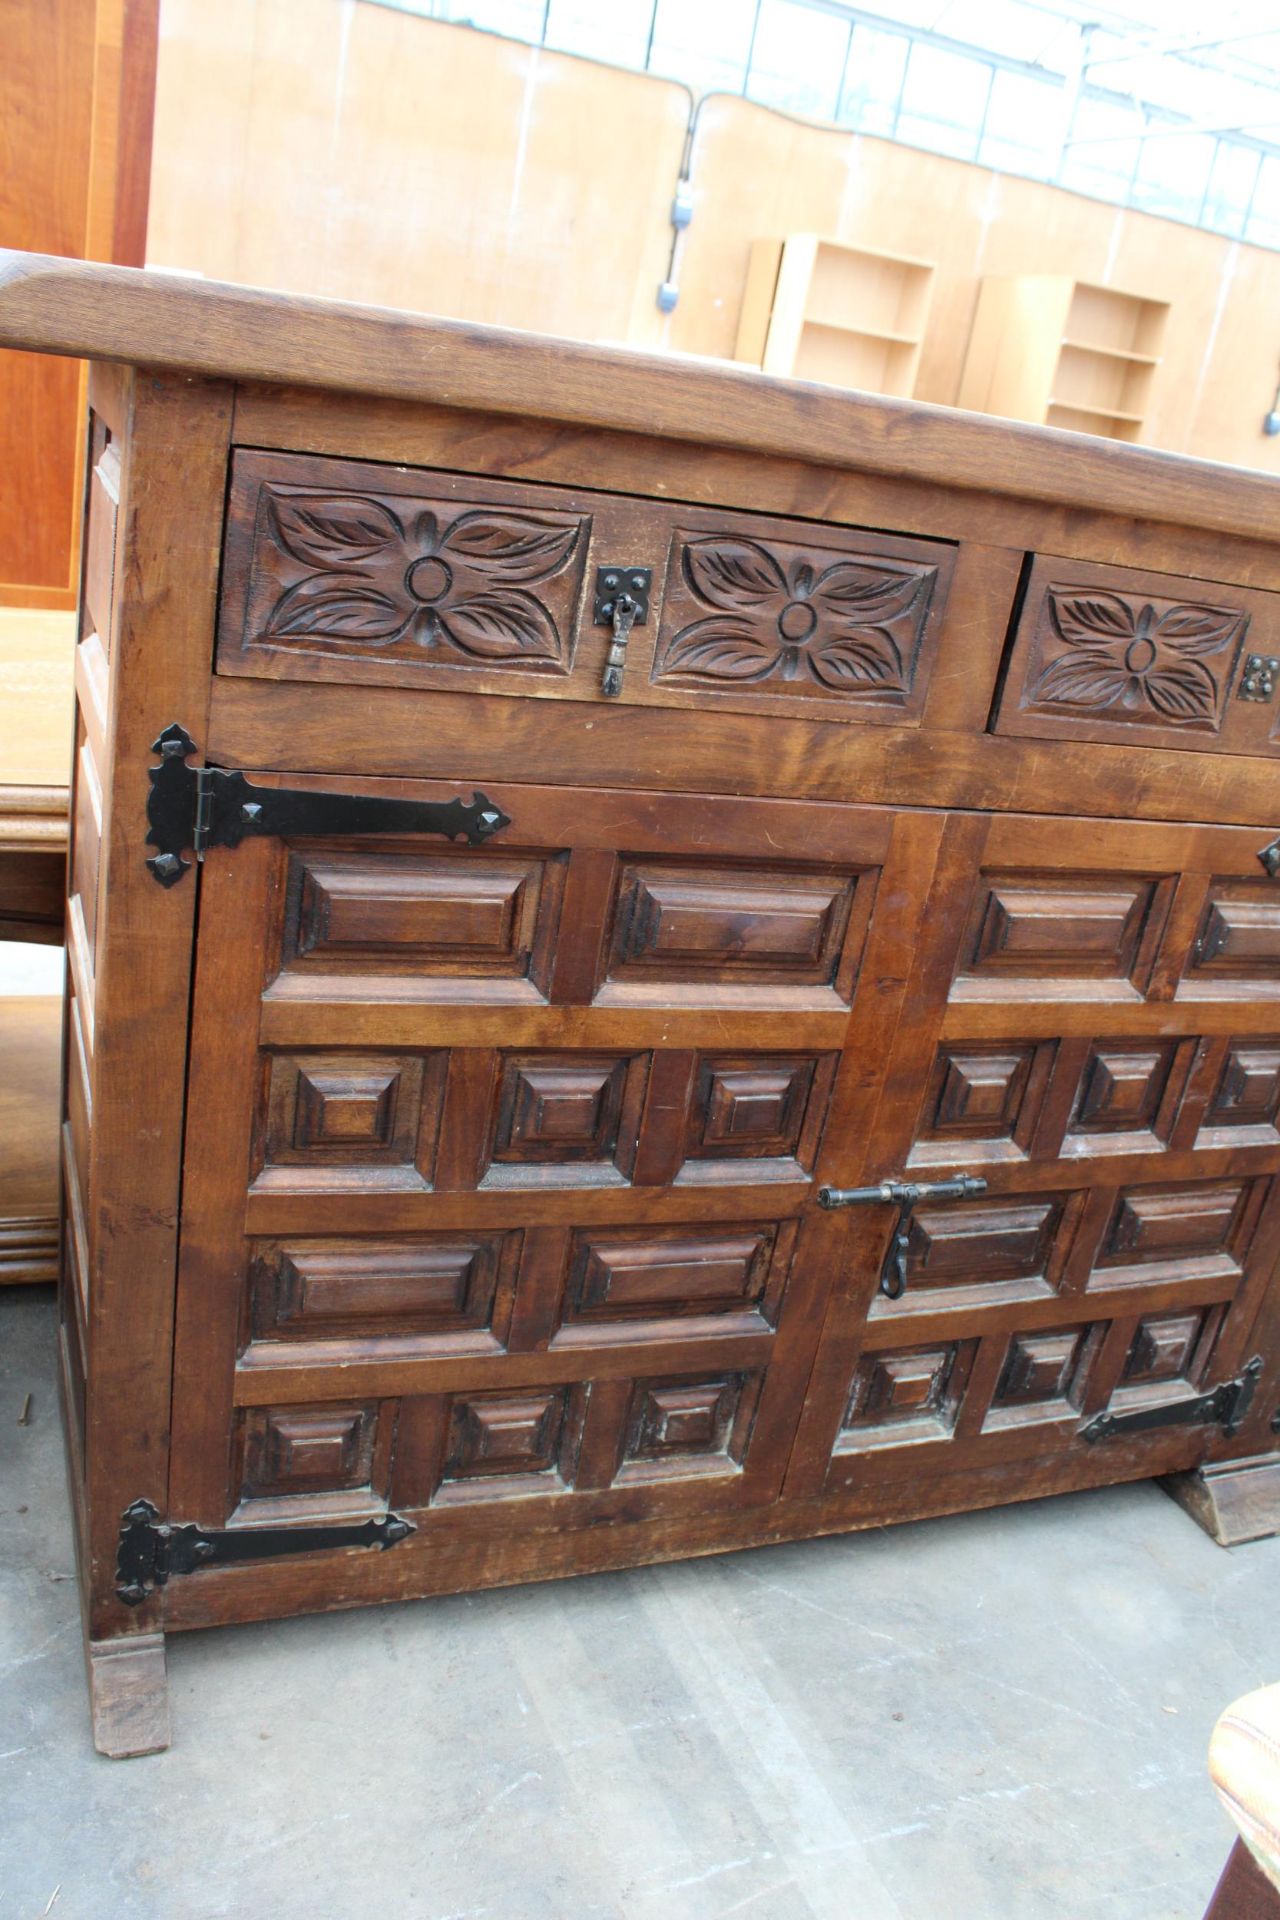 A MODERN SPANISH STYLE HARDWOOD SIDEBOARD WITH RAISED PANEL DOORS AND CARVED DRAWERS, 77" WIDE - Image 3 of 5